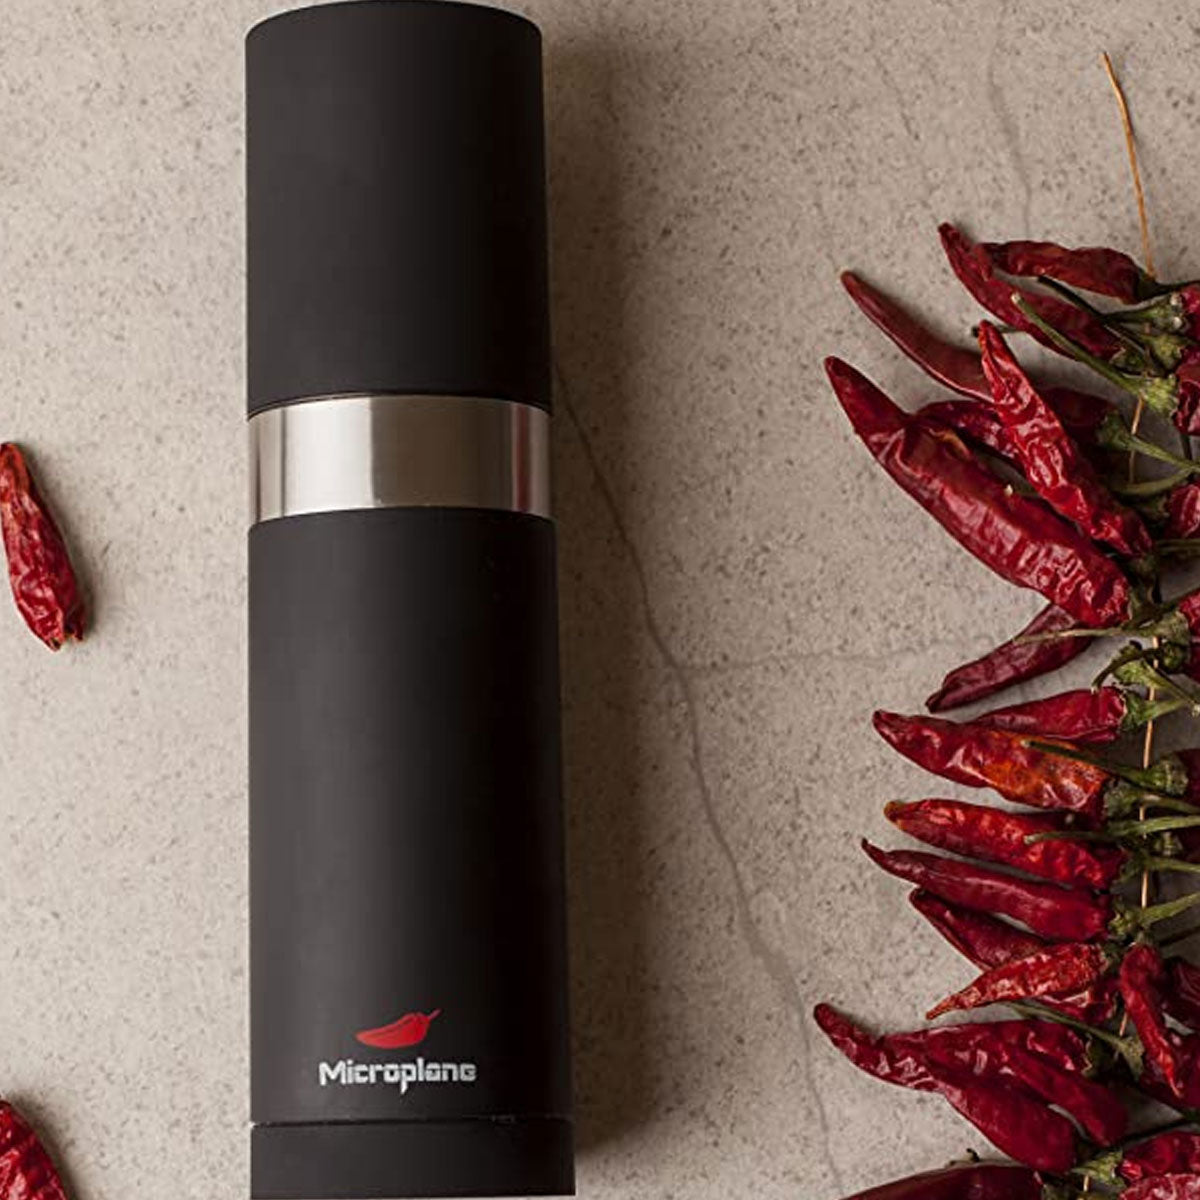 Microplane Chilli Mill For Dried chillies